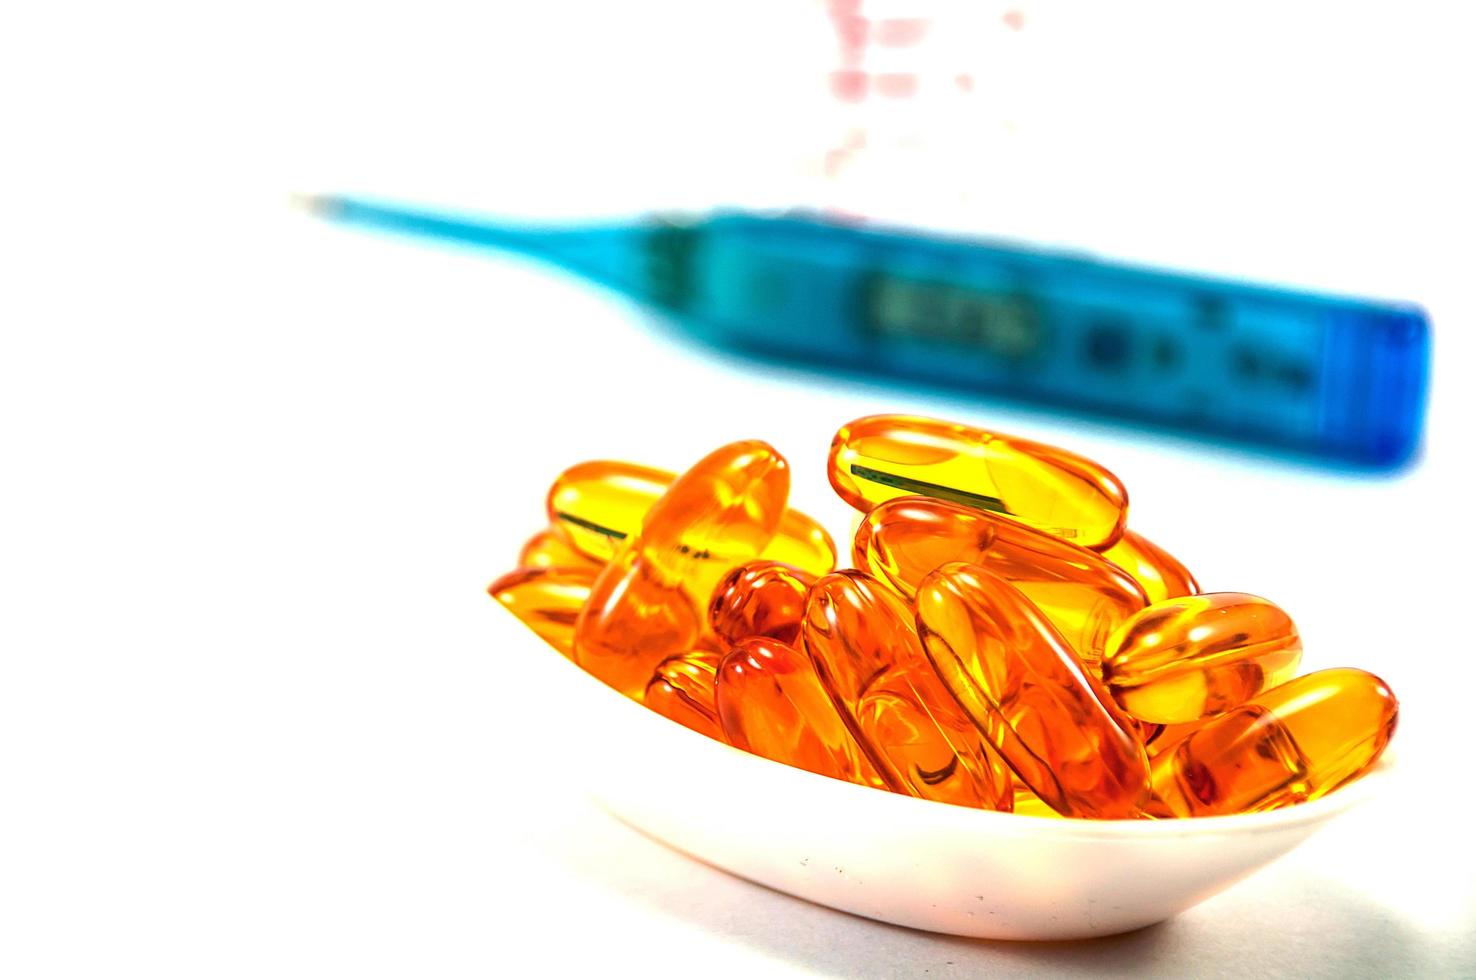 Fish oil with thermometer and glass on white background photo